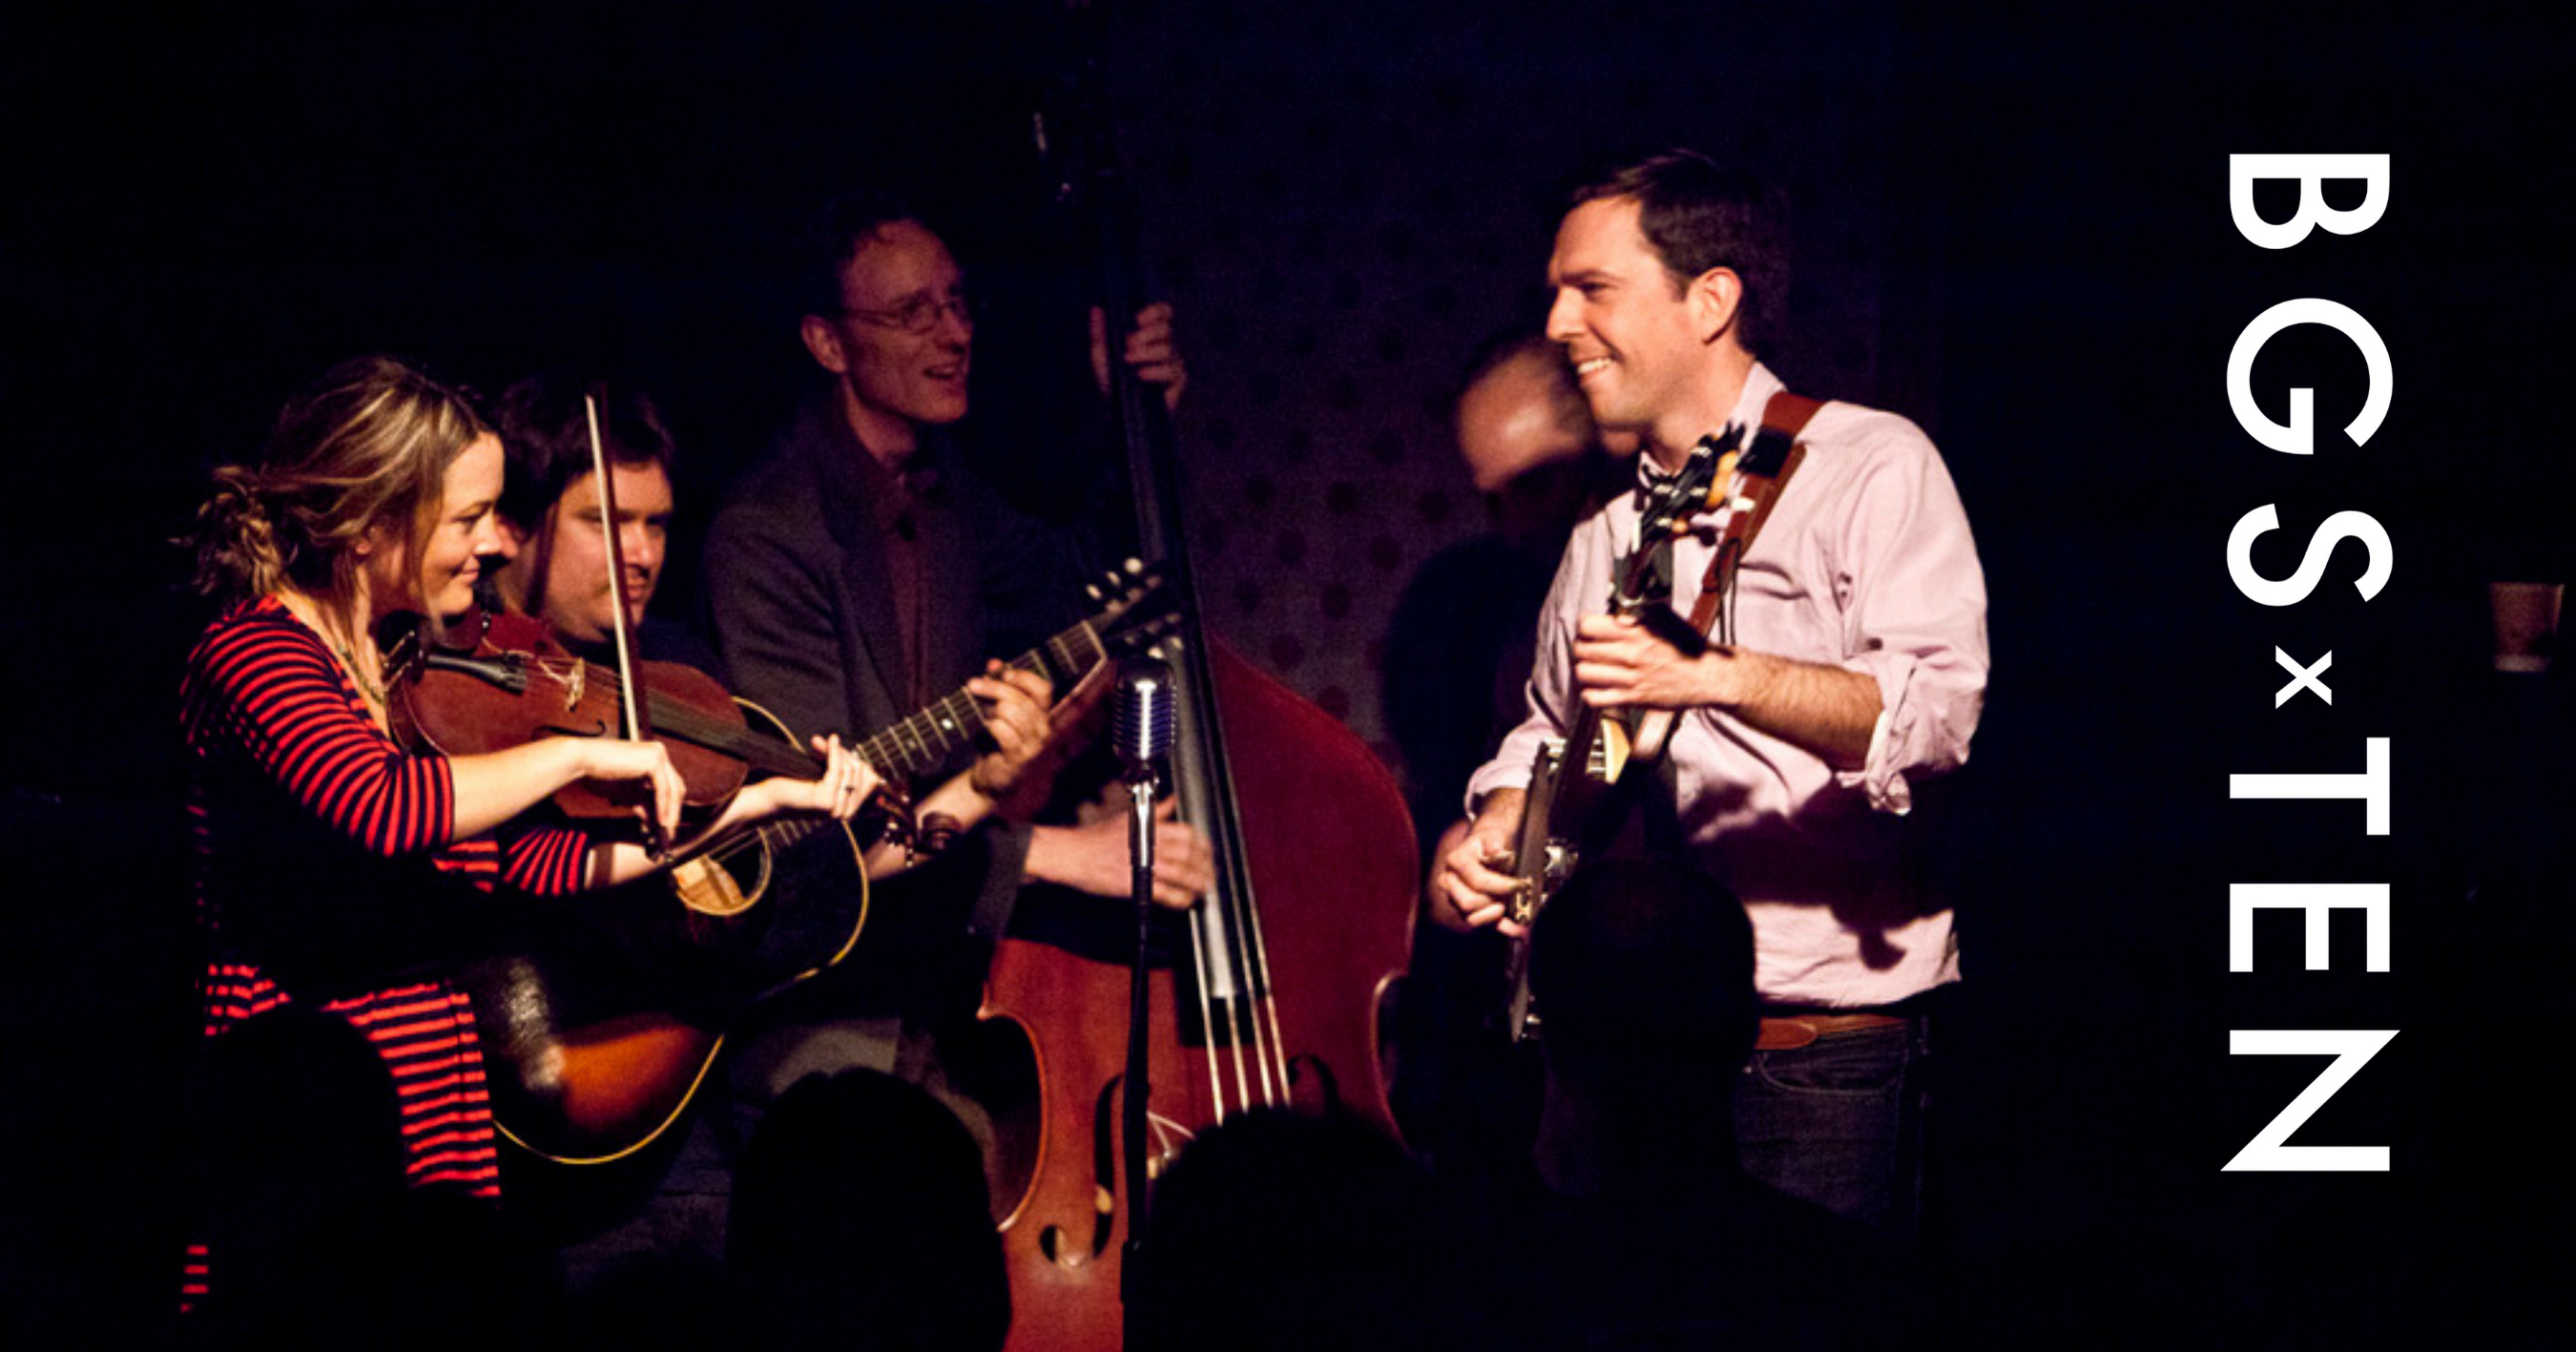 BGS Top 50 Moments, #3: The LA Bluegrass Situation at Largo